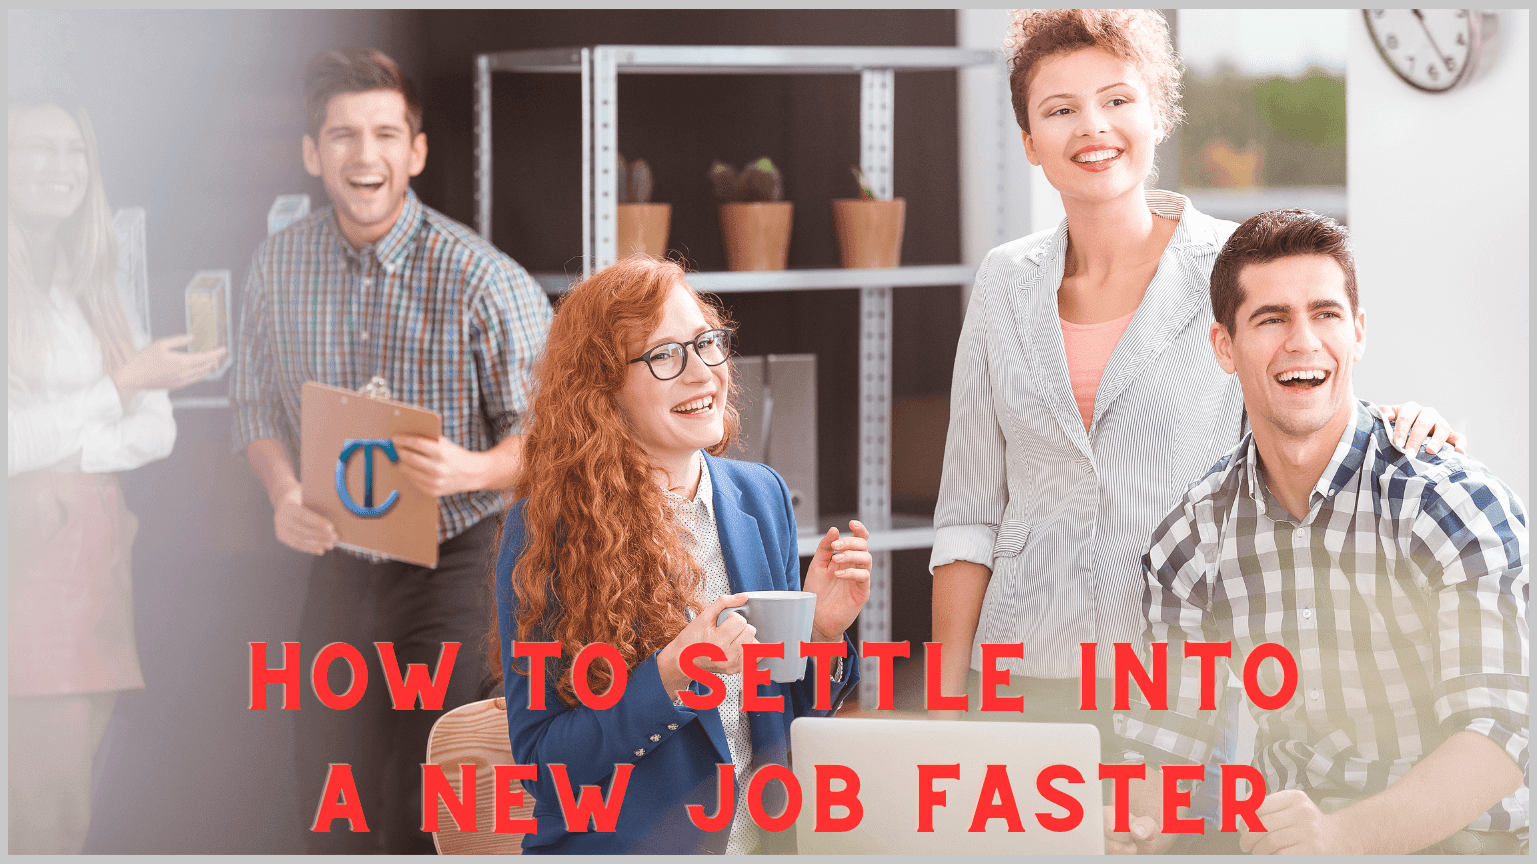 How to settle into a new job faster